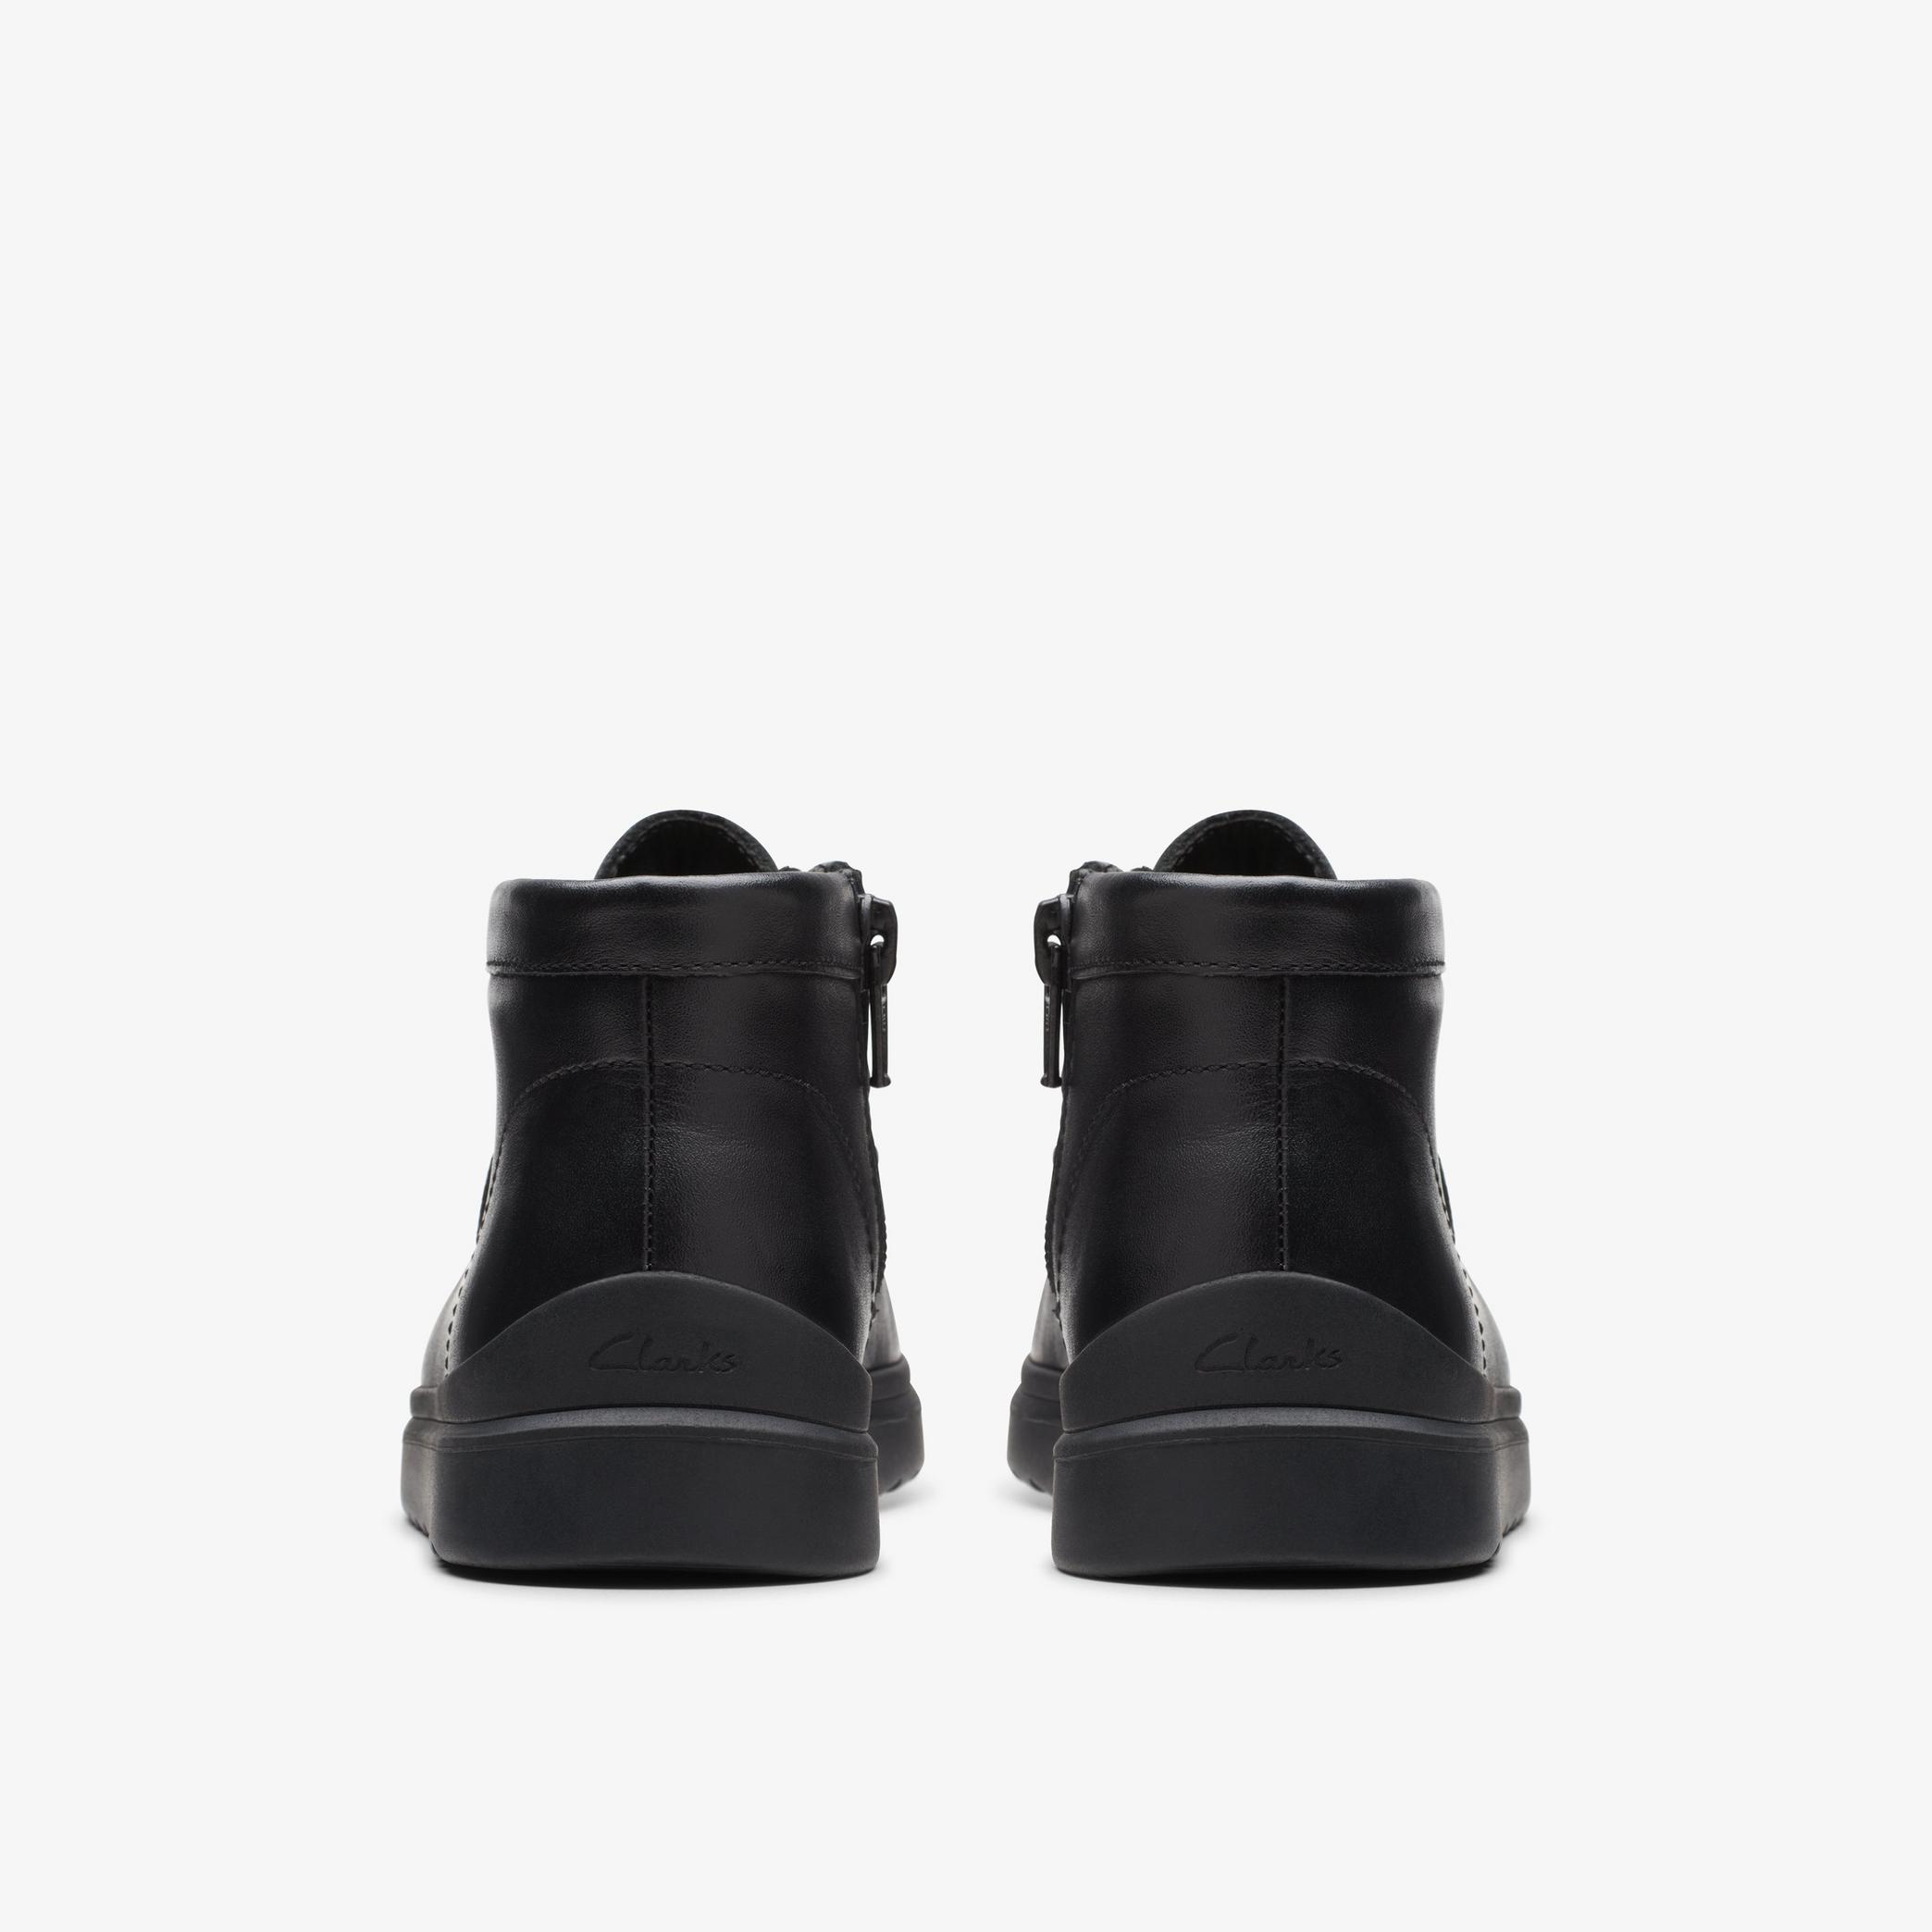 BOYS Goal Wally Kid Black Leather Ankle Boots | Clarks US